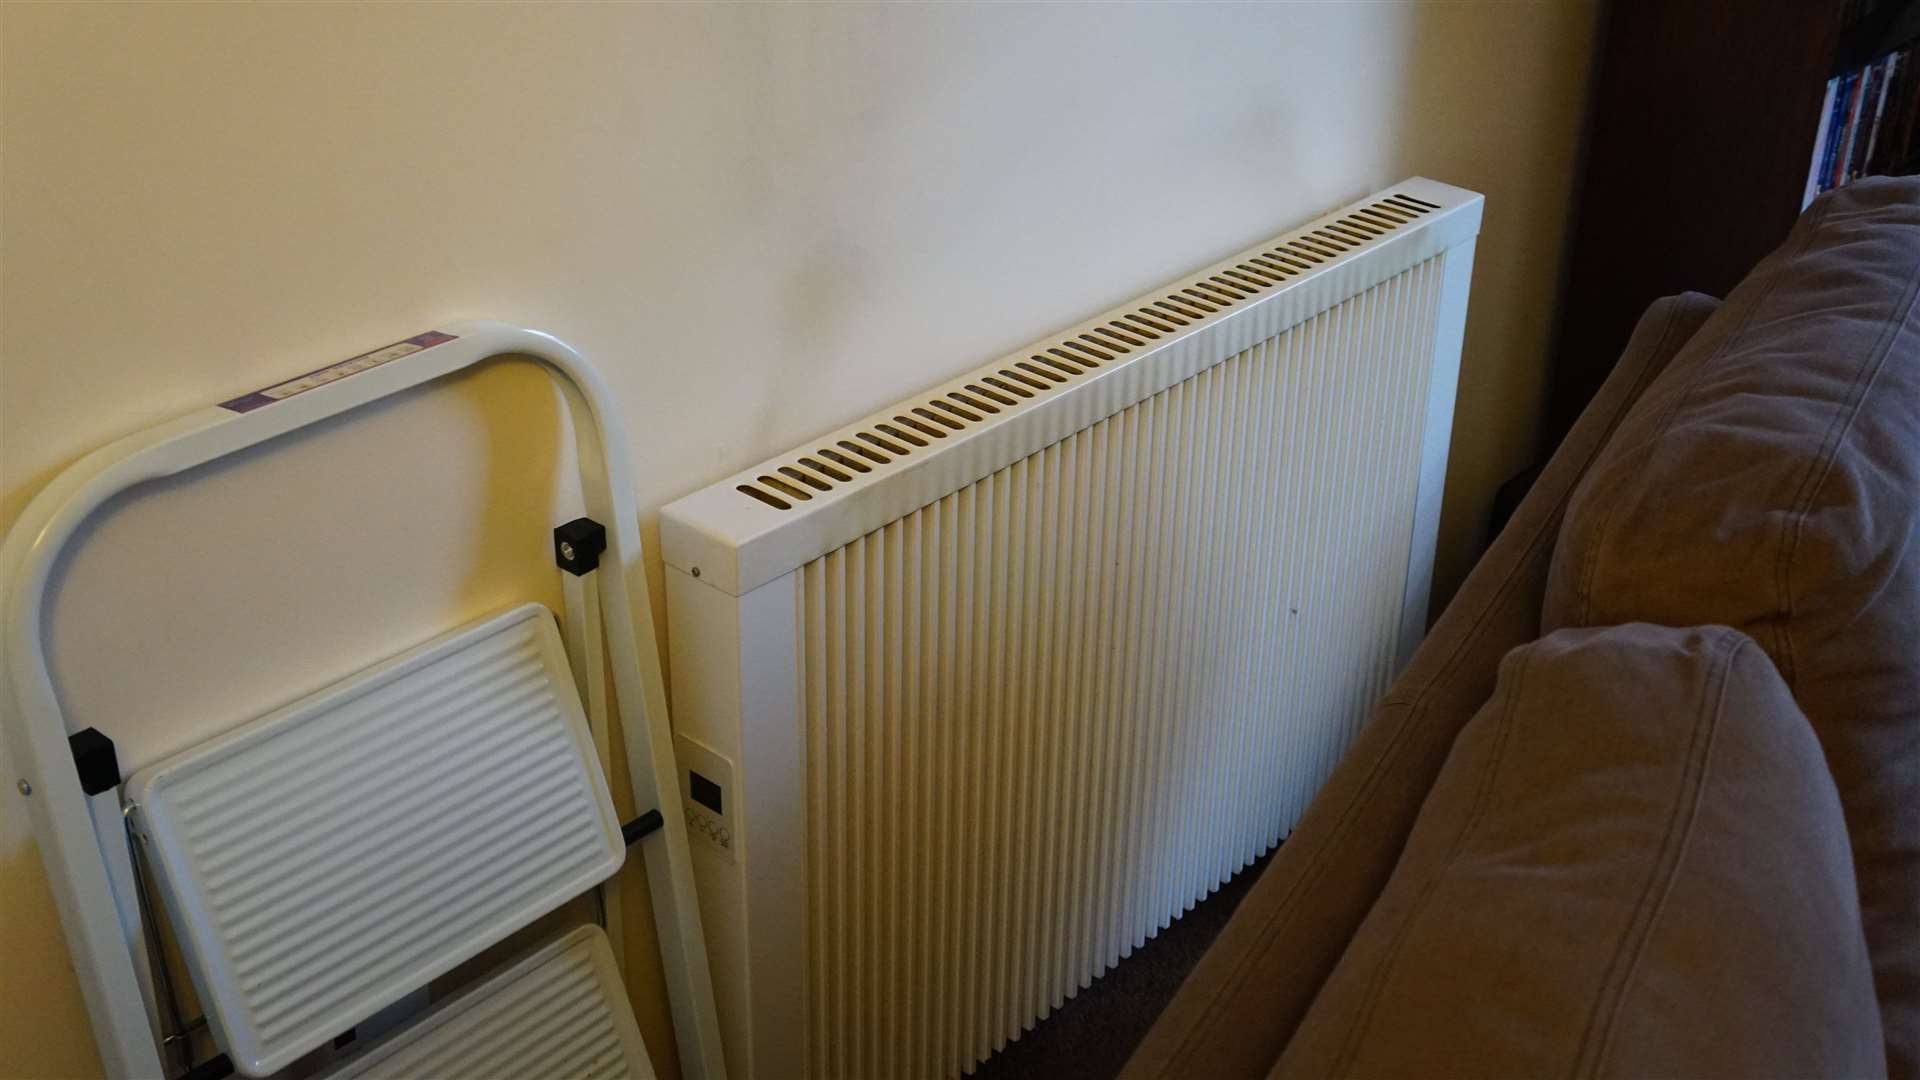 One of the electric heaters that Peter says are no good and are expensive to run. Picture: DGS